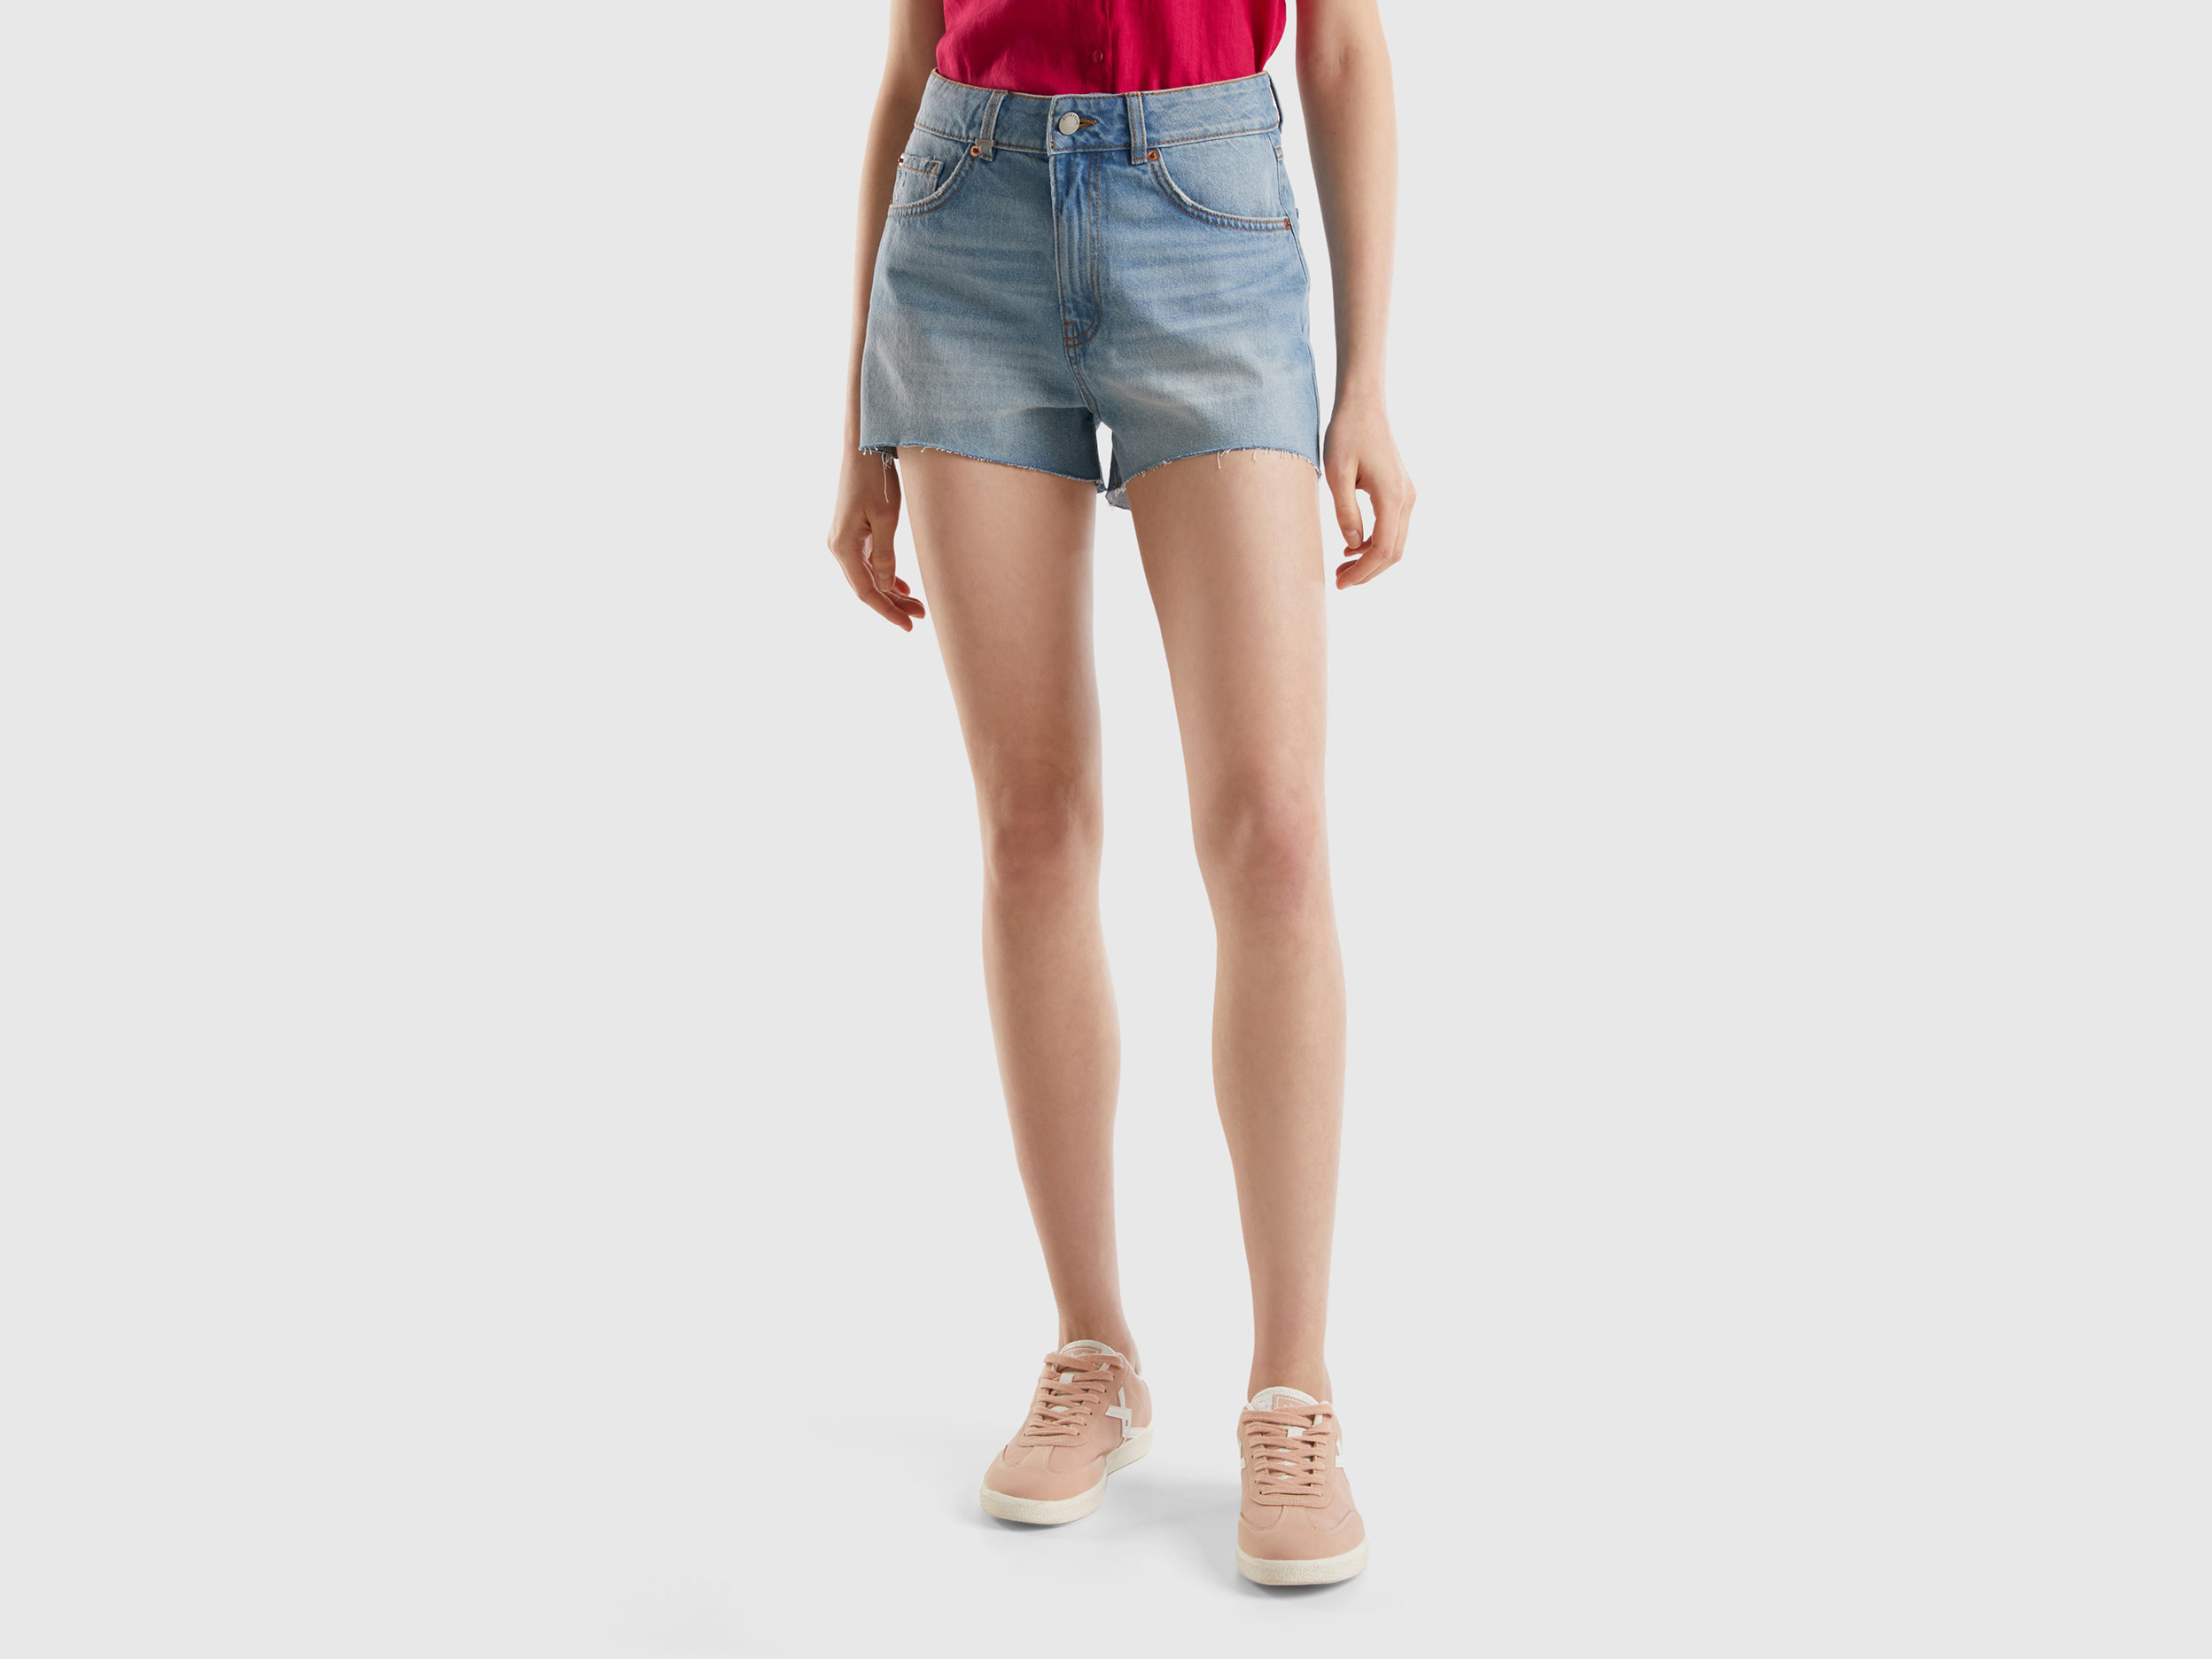 Image of Benetton, Frayed Shorts In Recycled Cotton Blend, size 27, Light Blue, Women